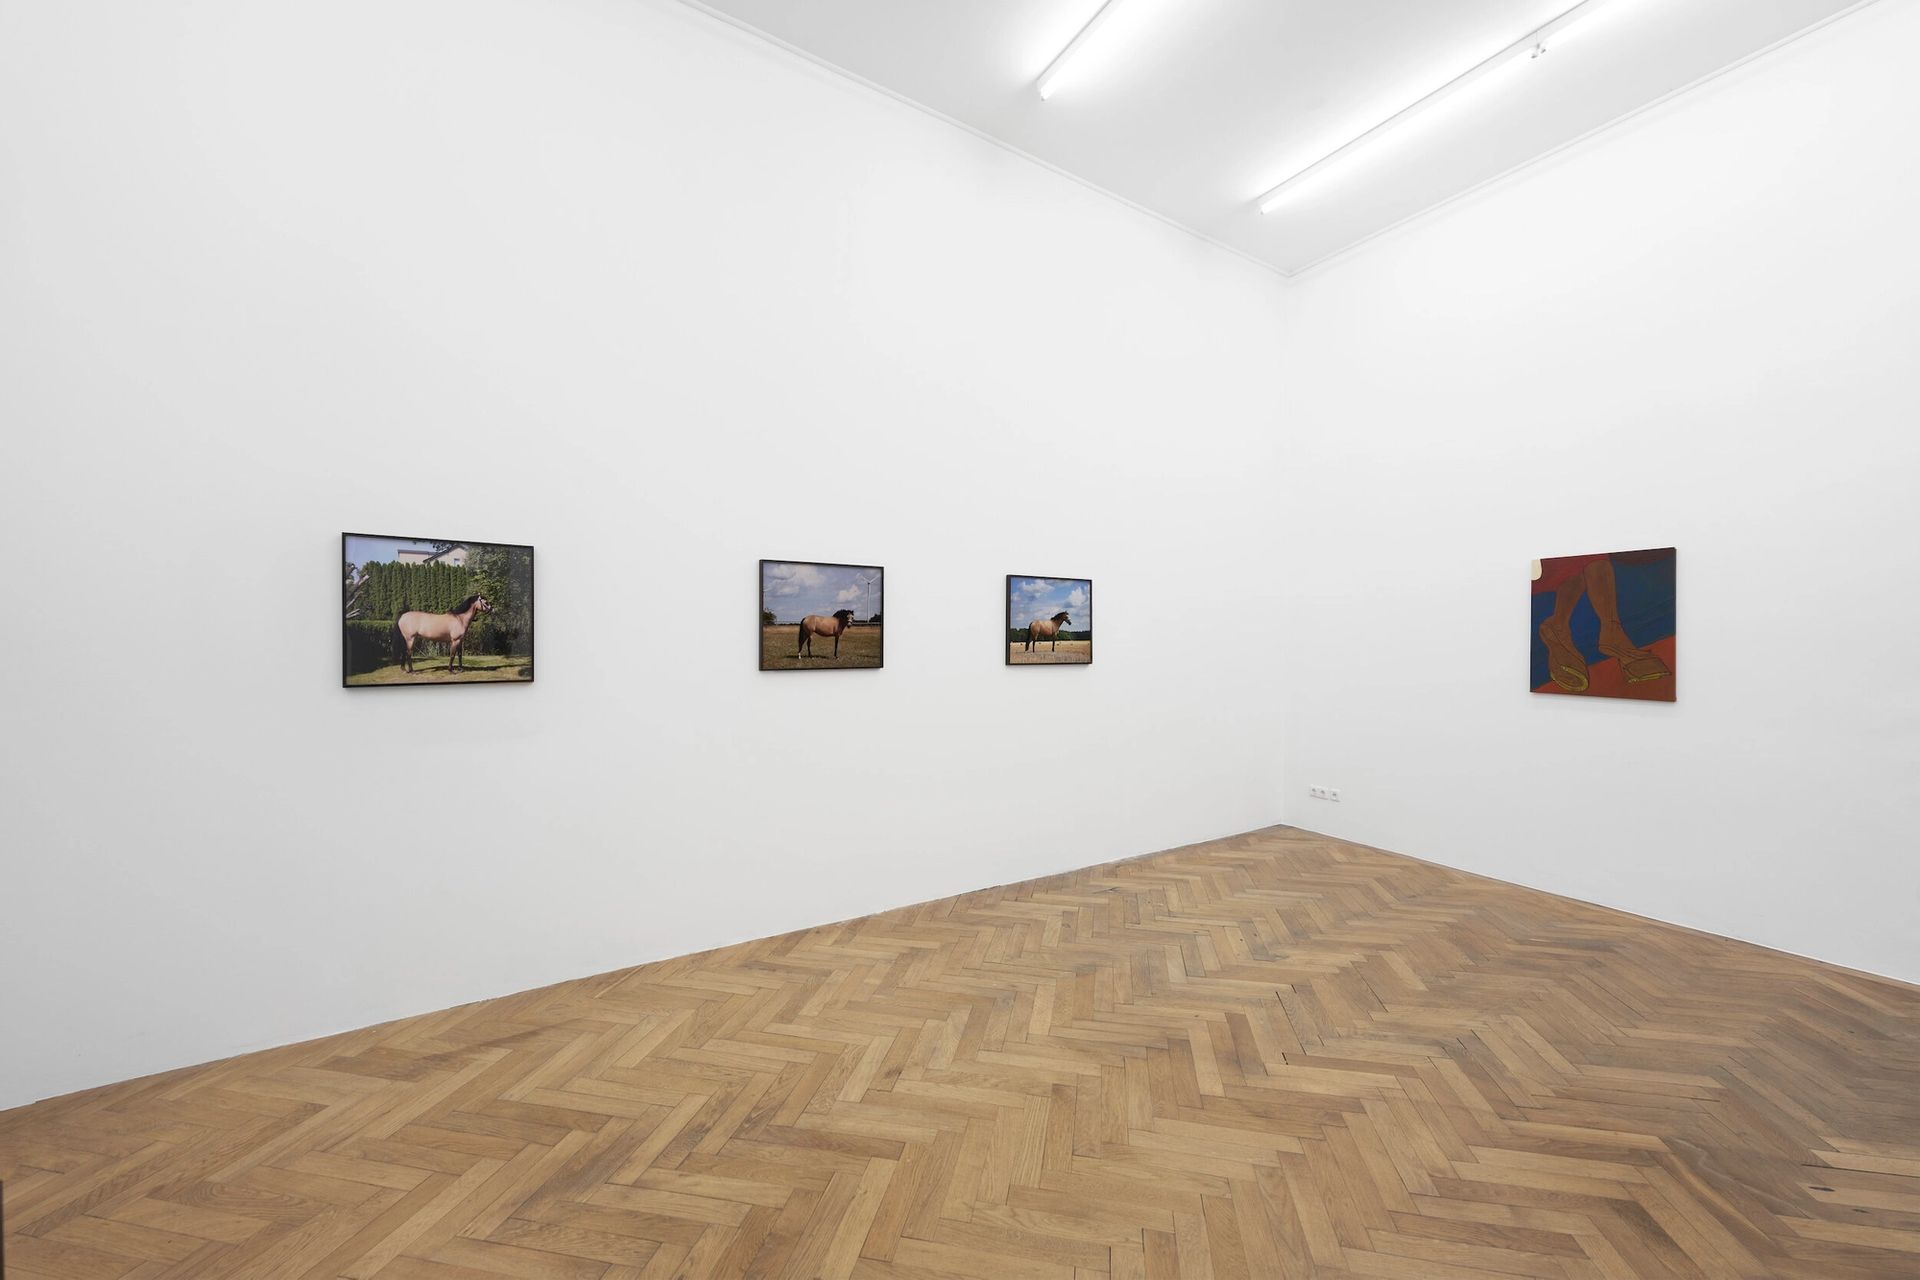 Installation view: „Various Others 2020“, Lena Henke, Dominique Knowels, Megan Francis Sullivan in cooperation with Galerie Emanuel Layr

Photo: Ulrich Gebert